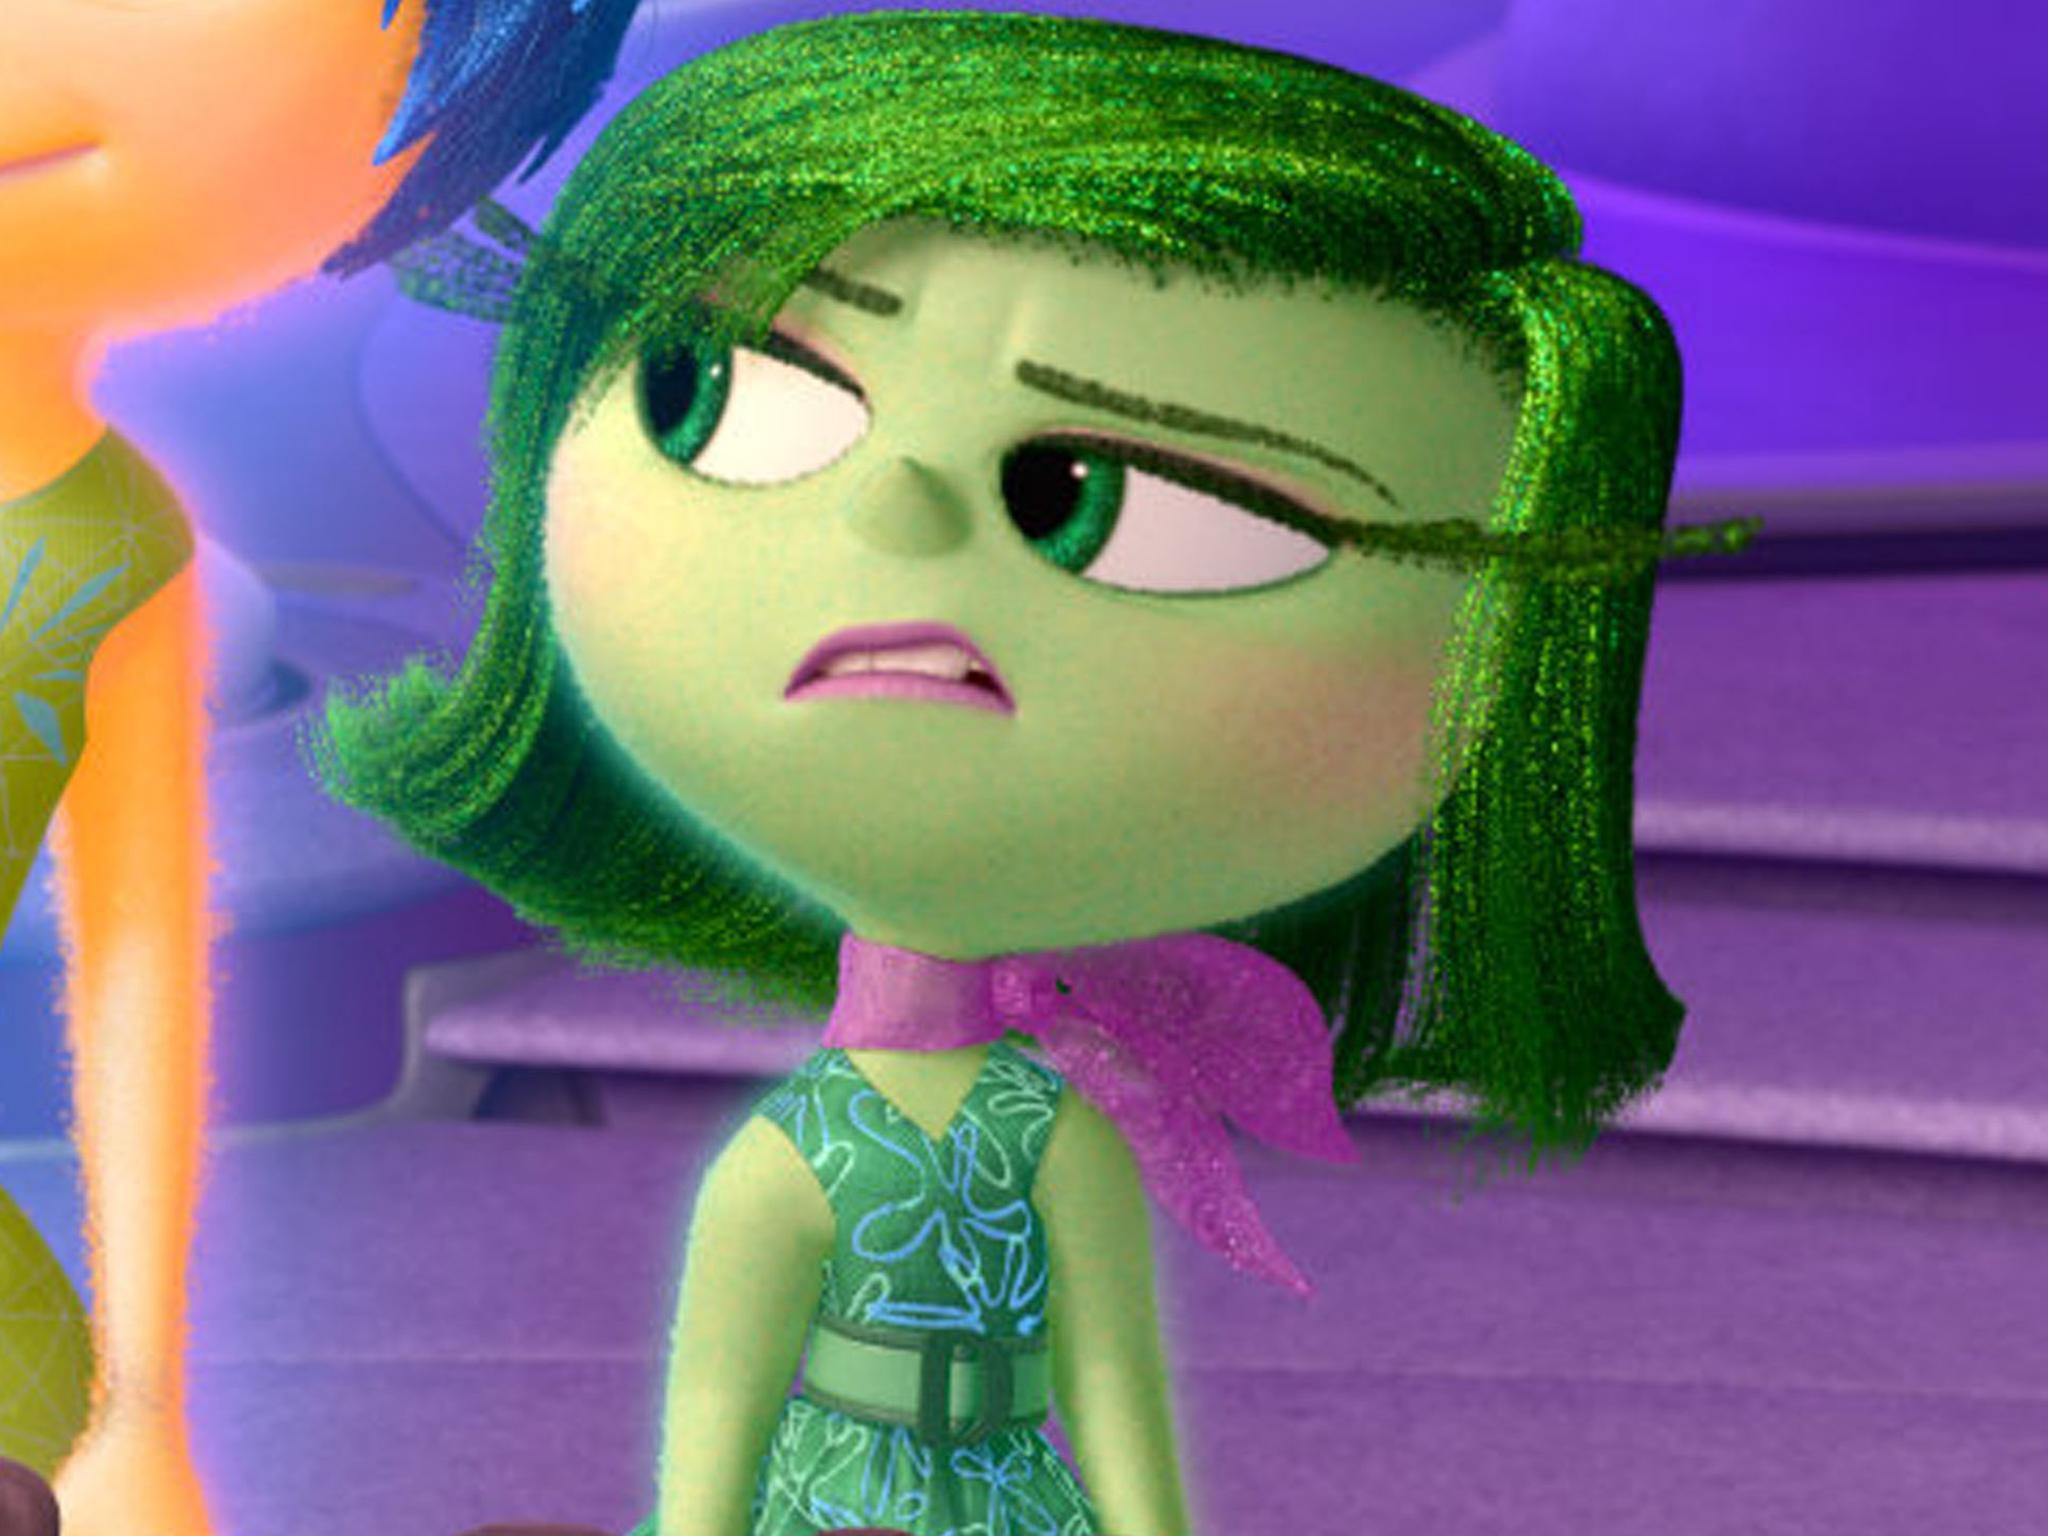 Disgust from Pixar's Inside Out (2015)